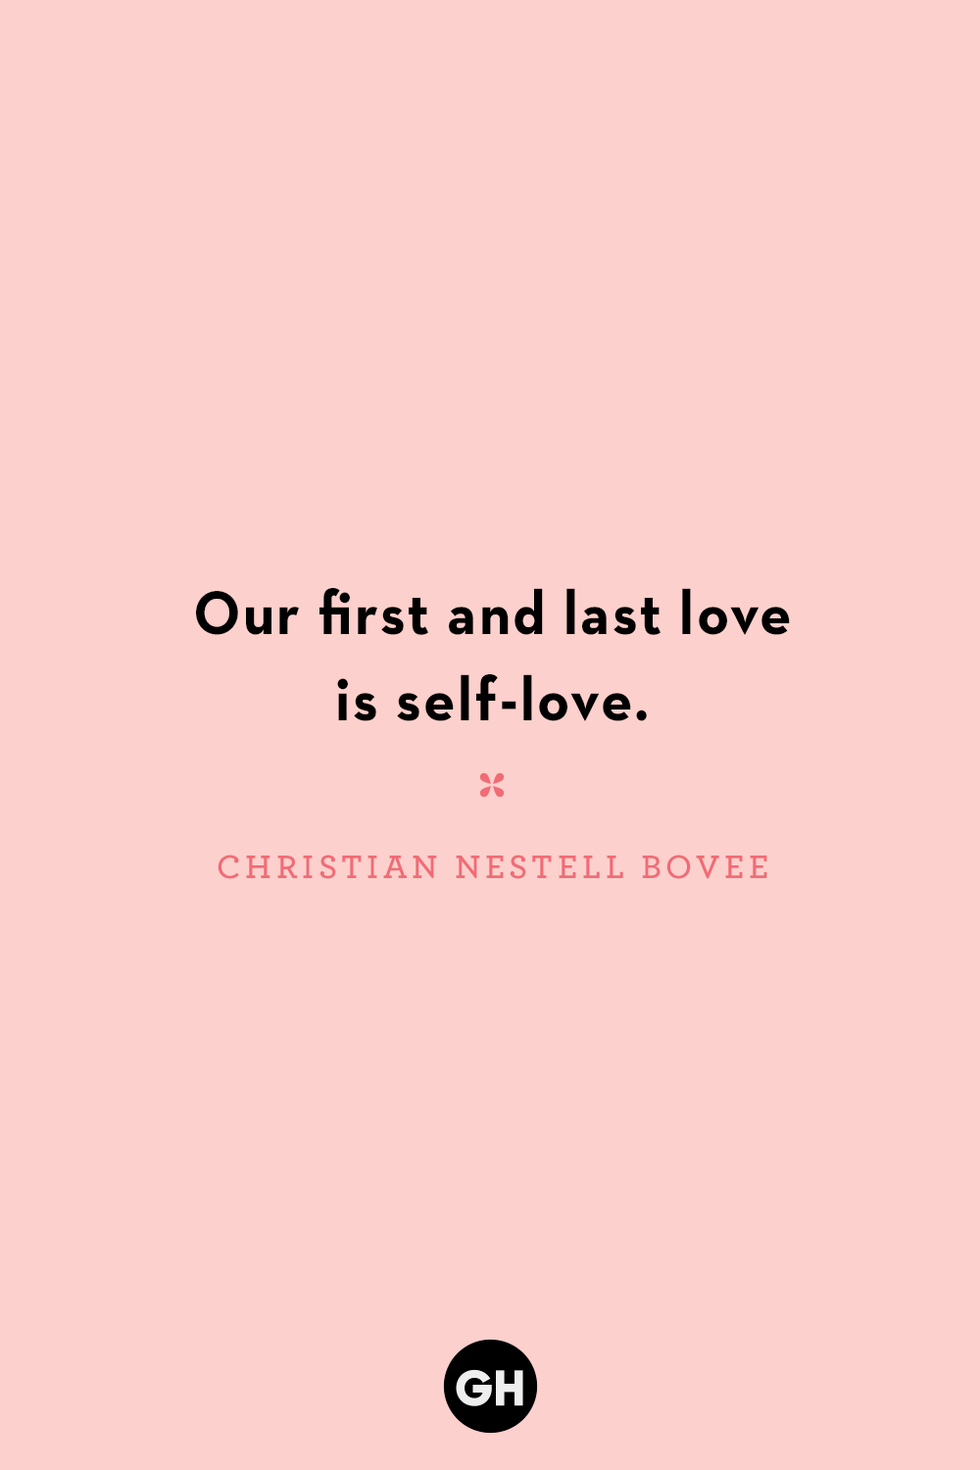 Love Never Dies: 15 Spiritual Quotes to Heighten Your Connections